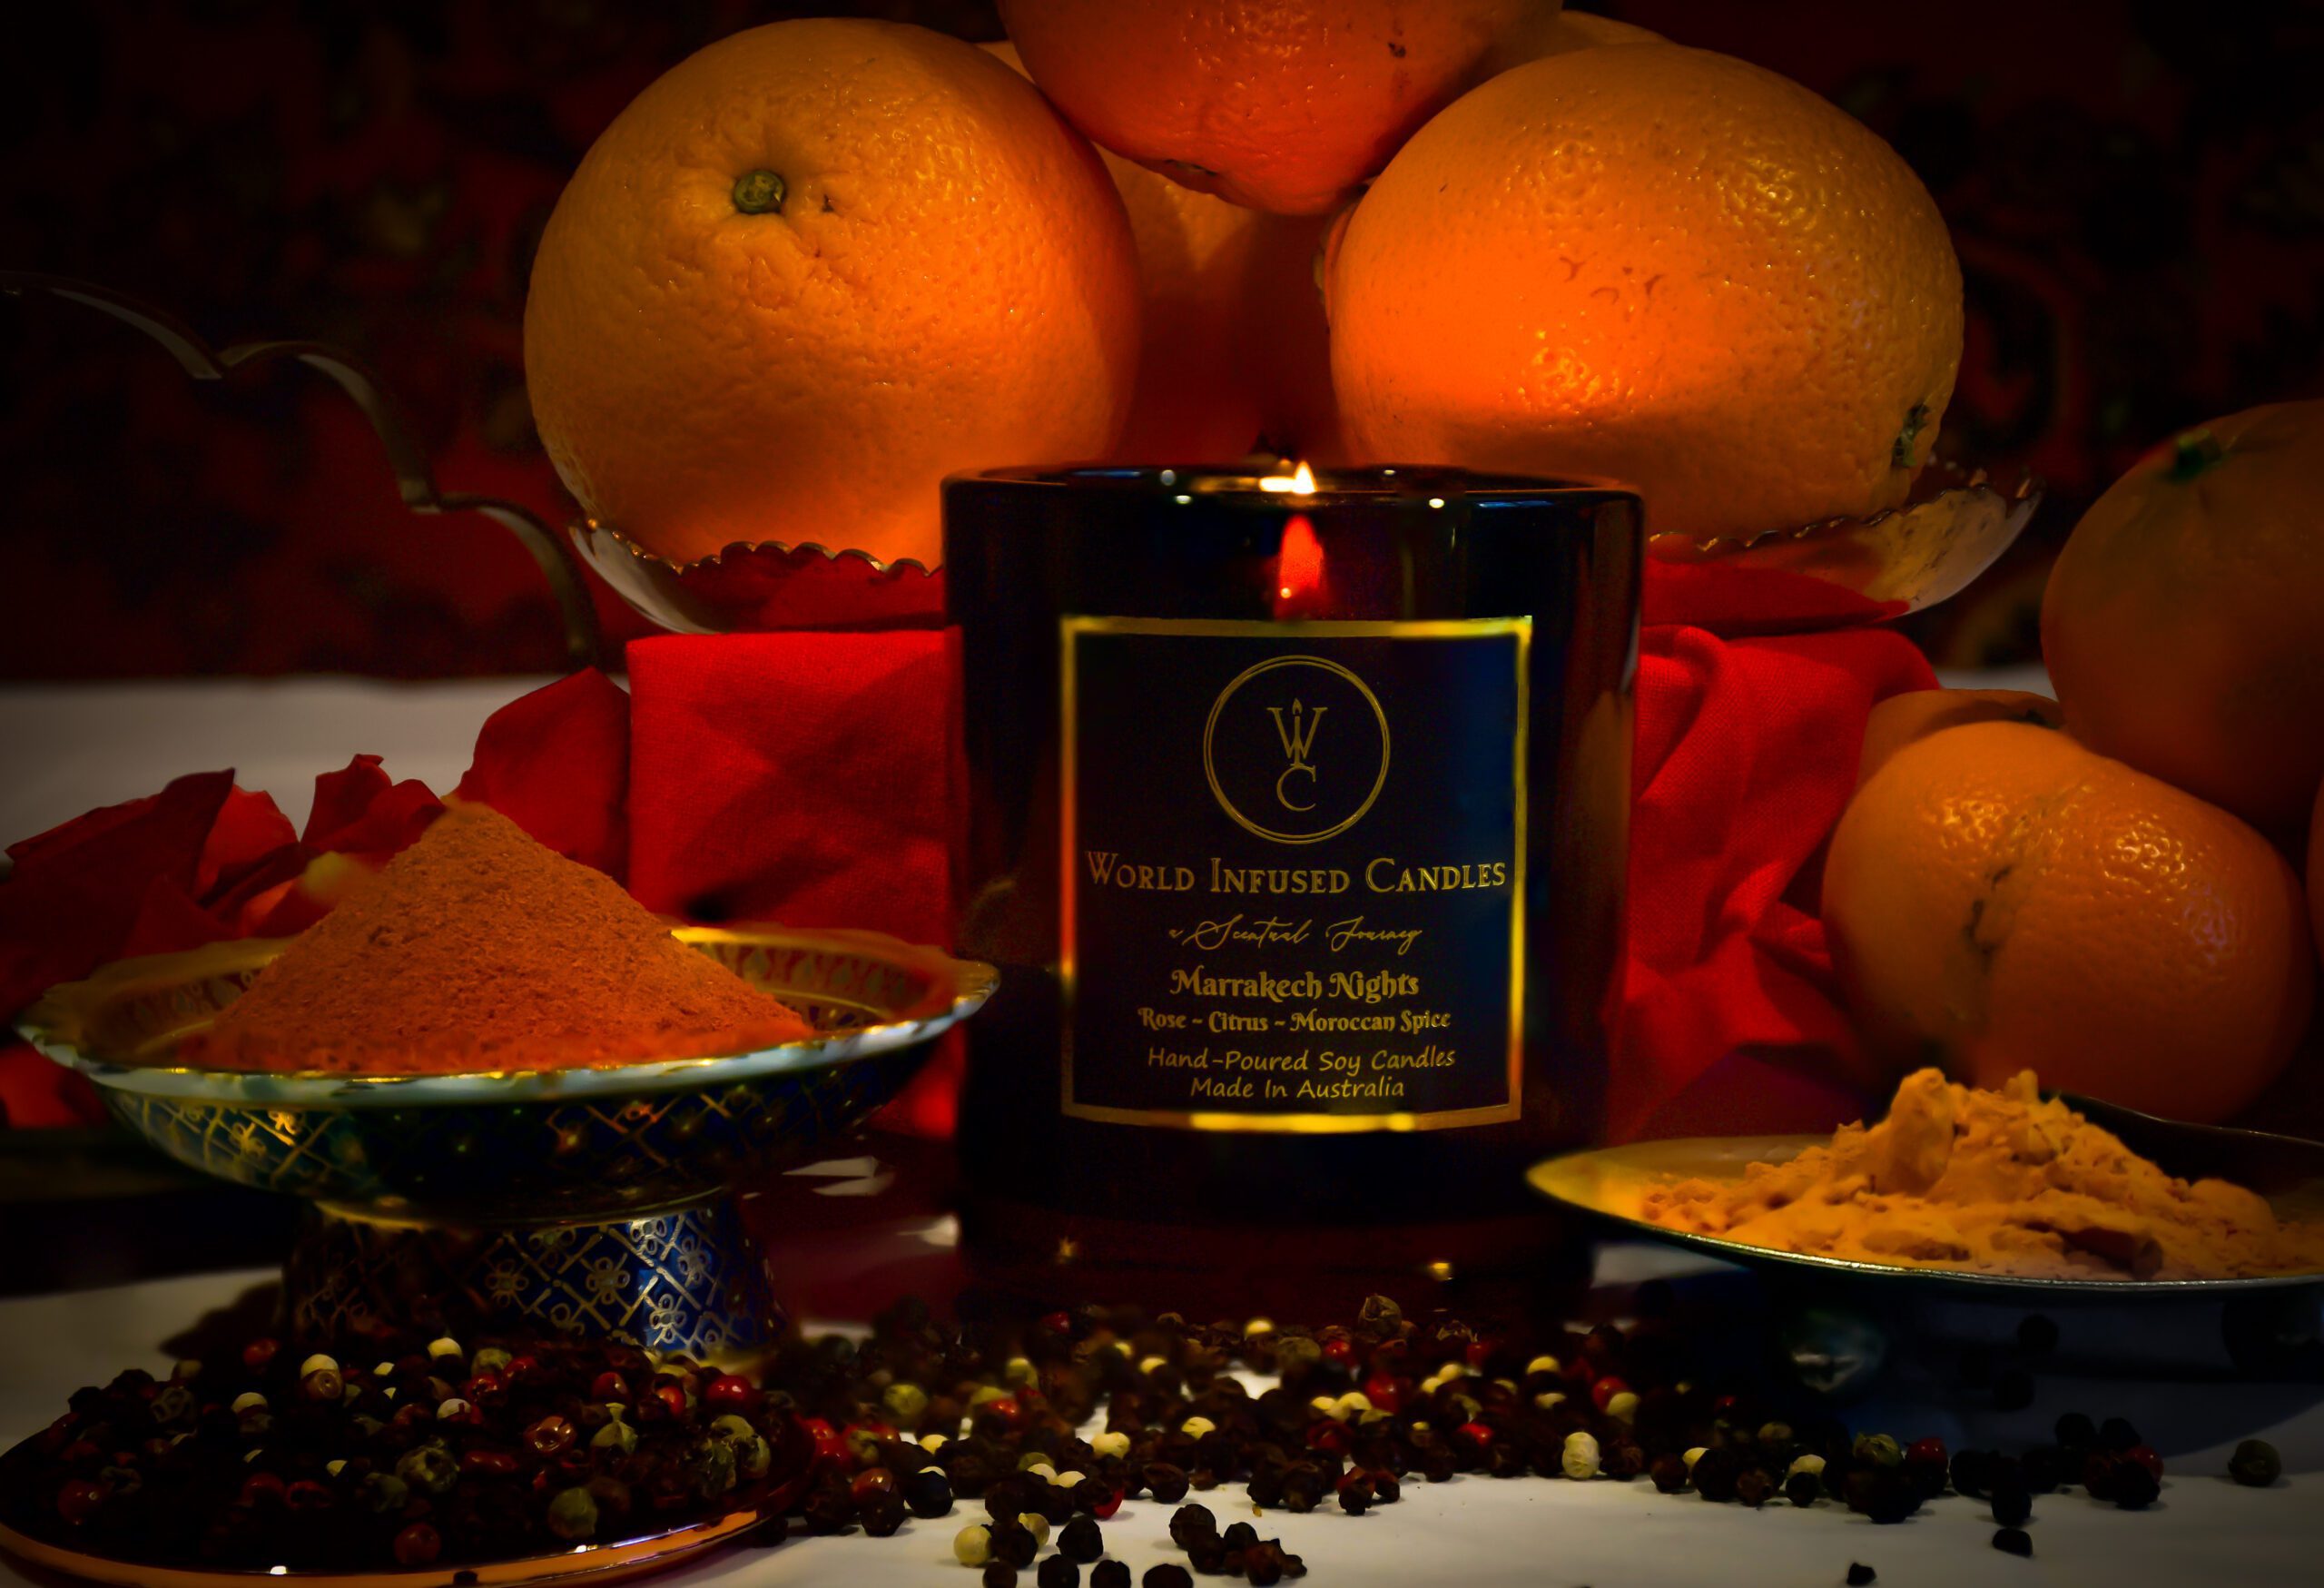 Marrakech Nights Soy Candle lit with spices in the foreground. the background is filed with citrus fruits and rose petals